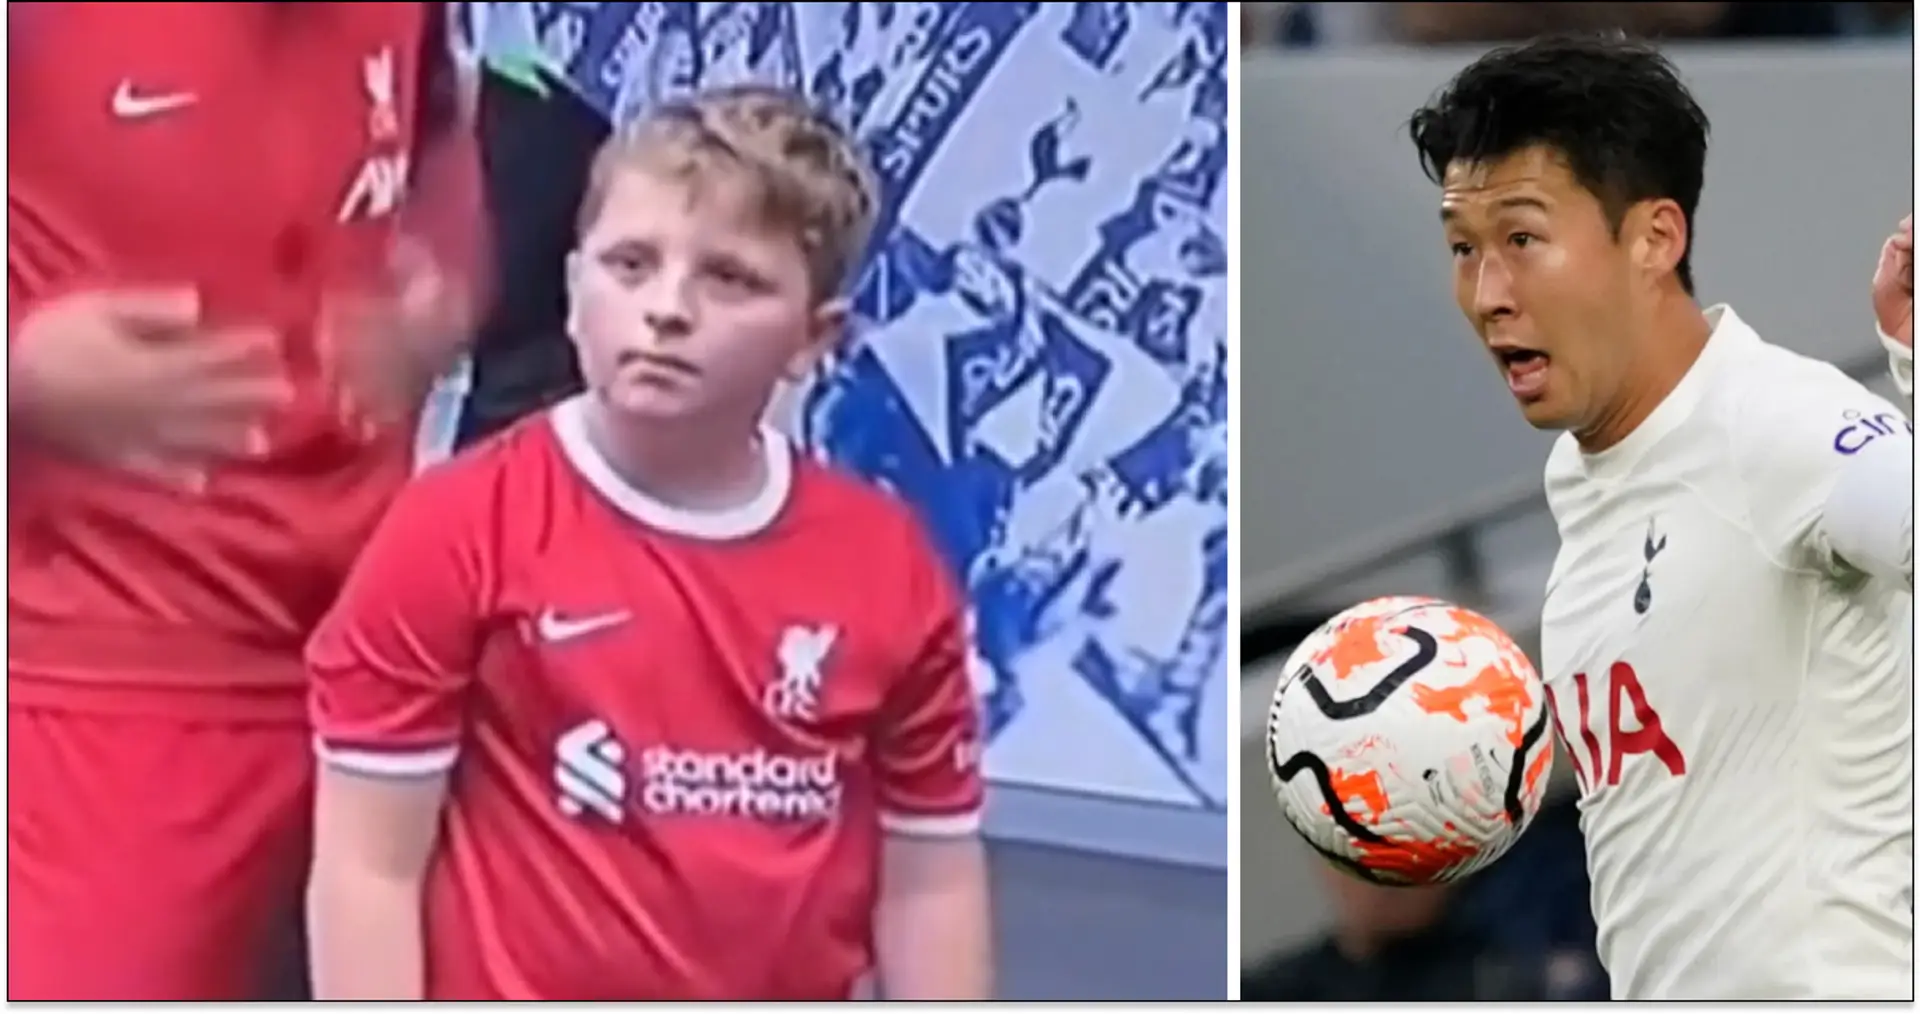 Son blanks Liverpool mascot that reminds fans of Shaqiri